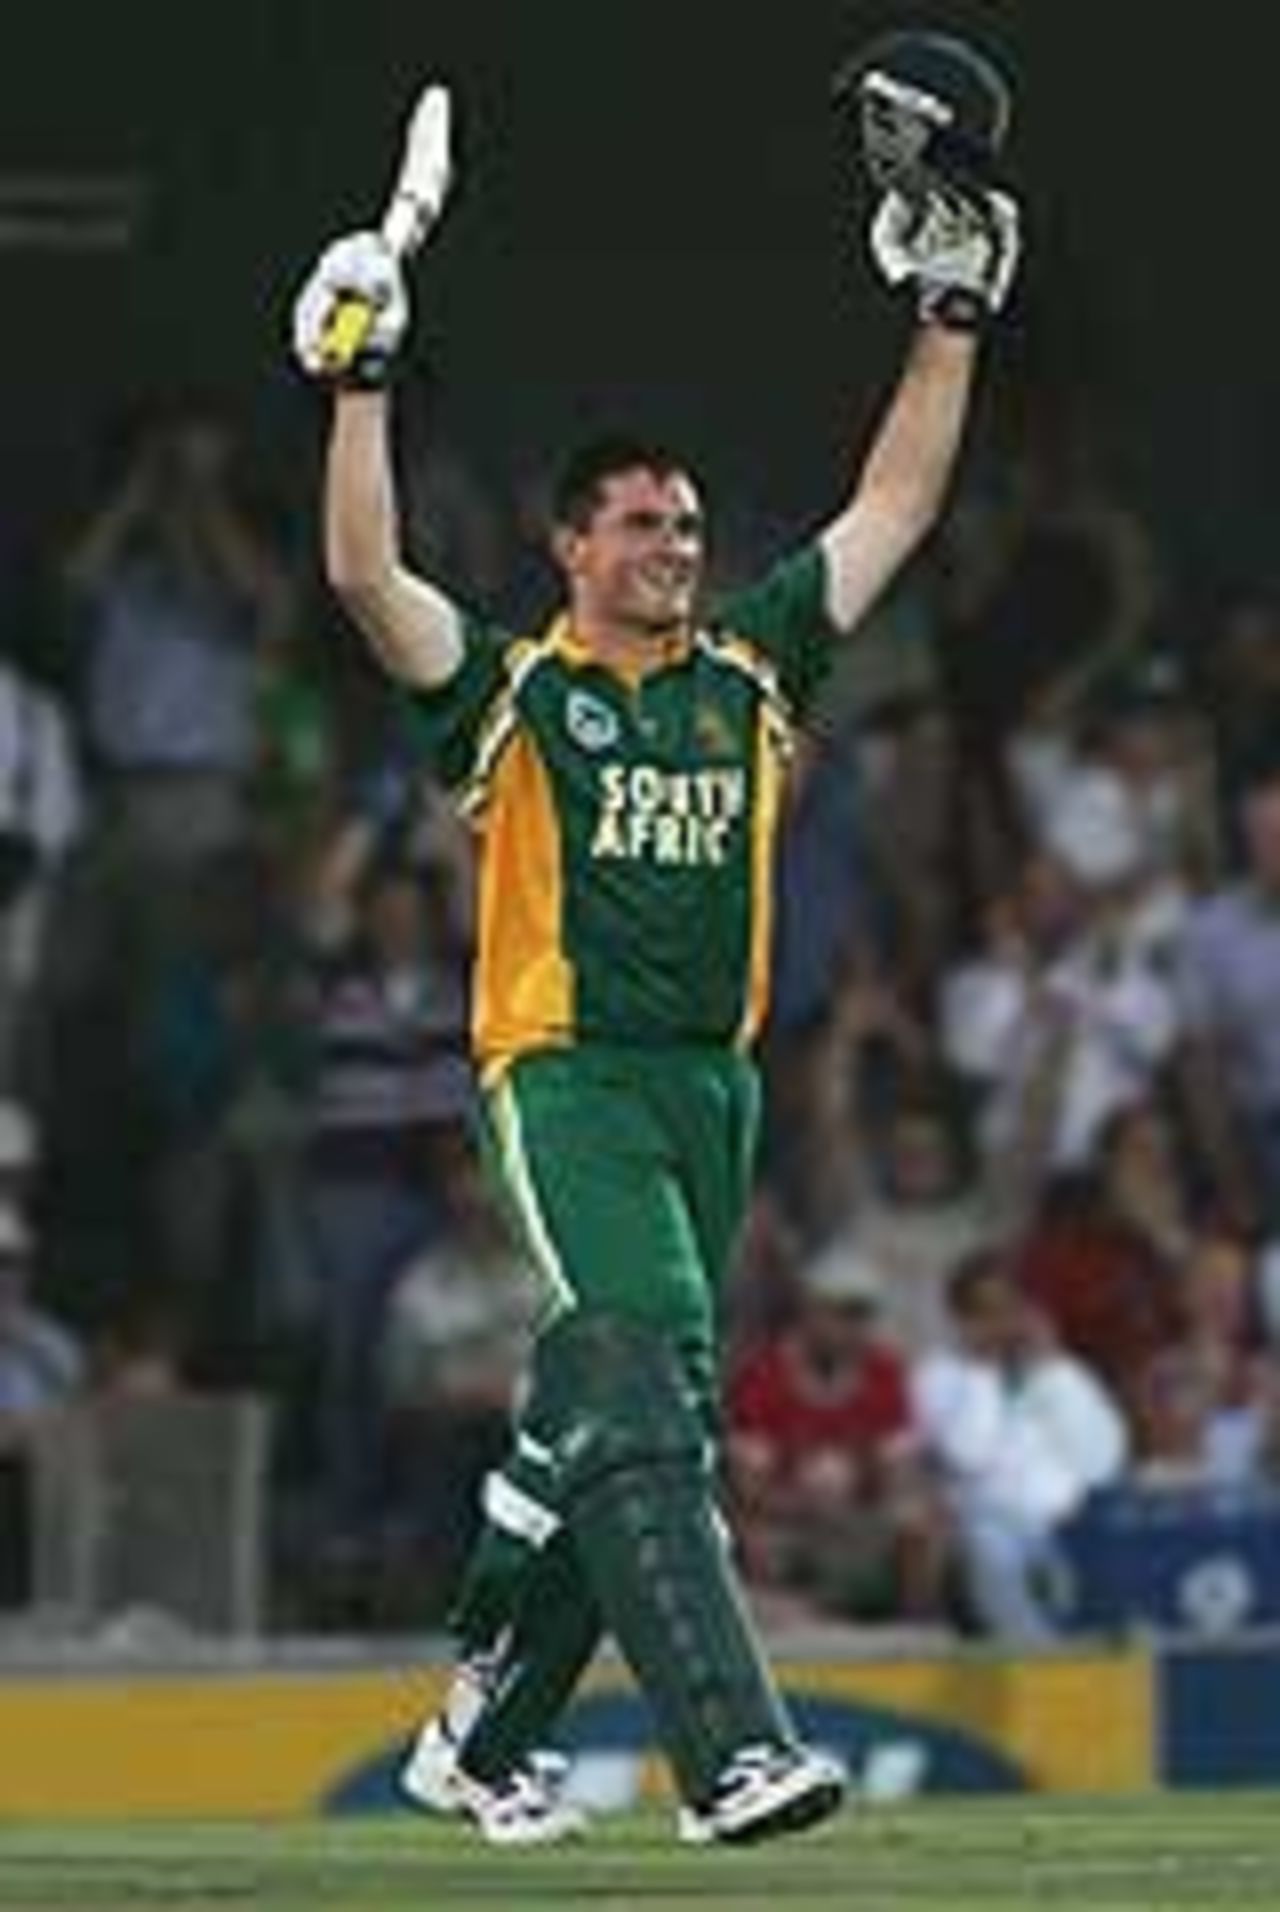 Graeme Smith scores his second ODI century, in the fifth one-day international at Buffalo Park, East London, February 8, 2005